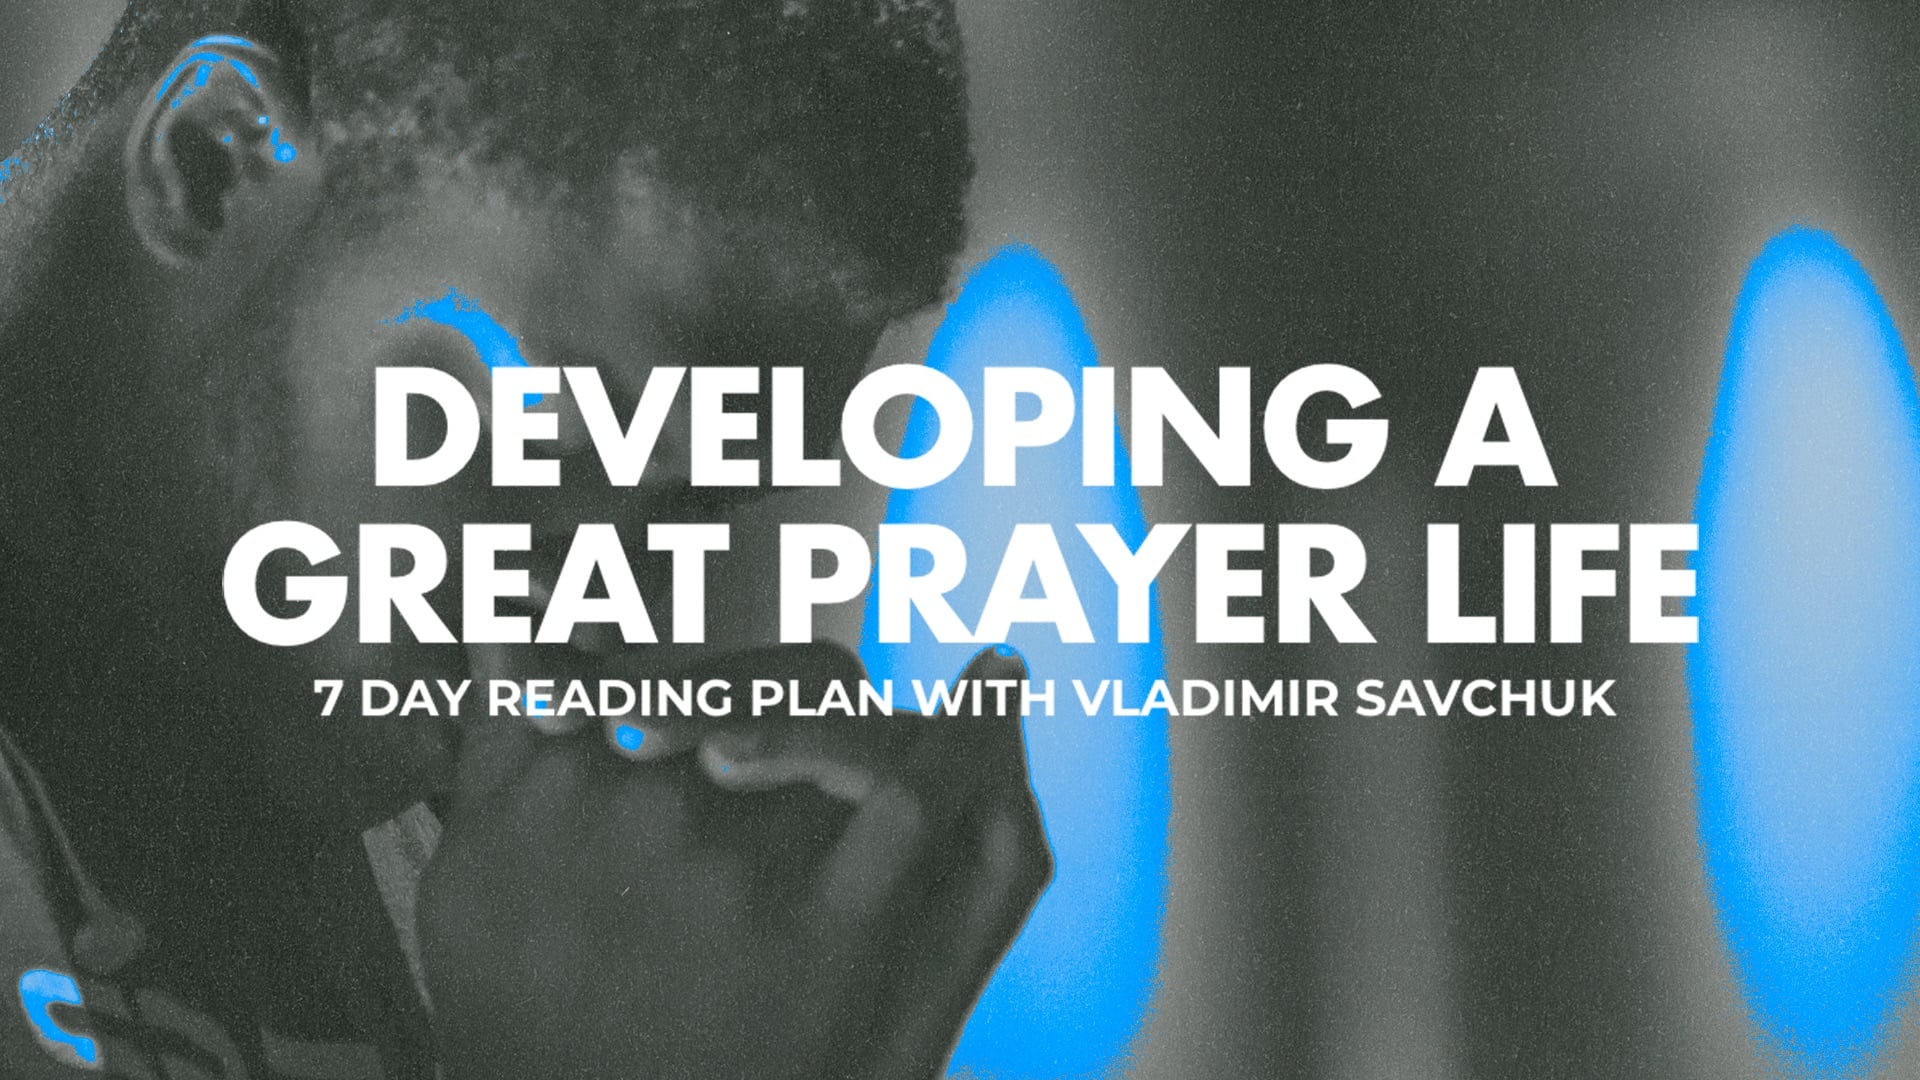 Featured Image for “Developing a Great Prayer Life”